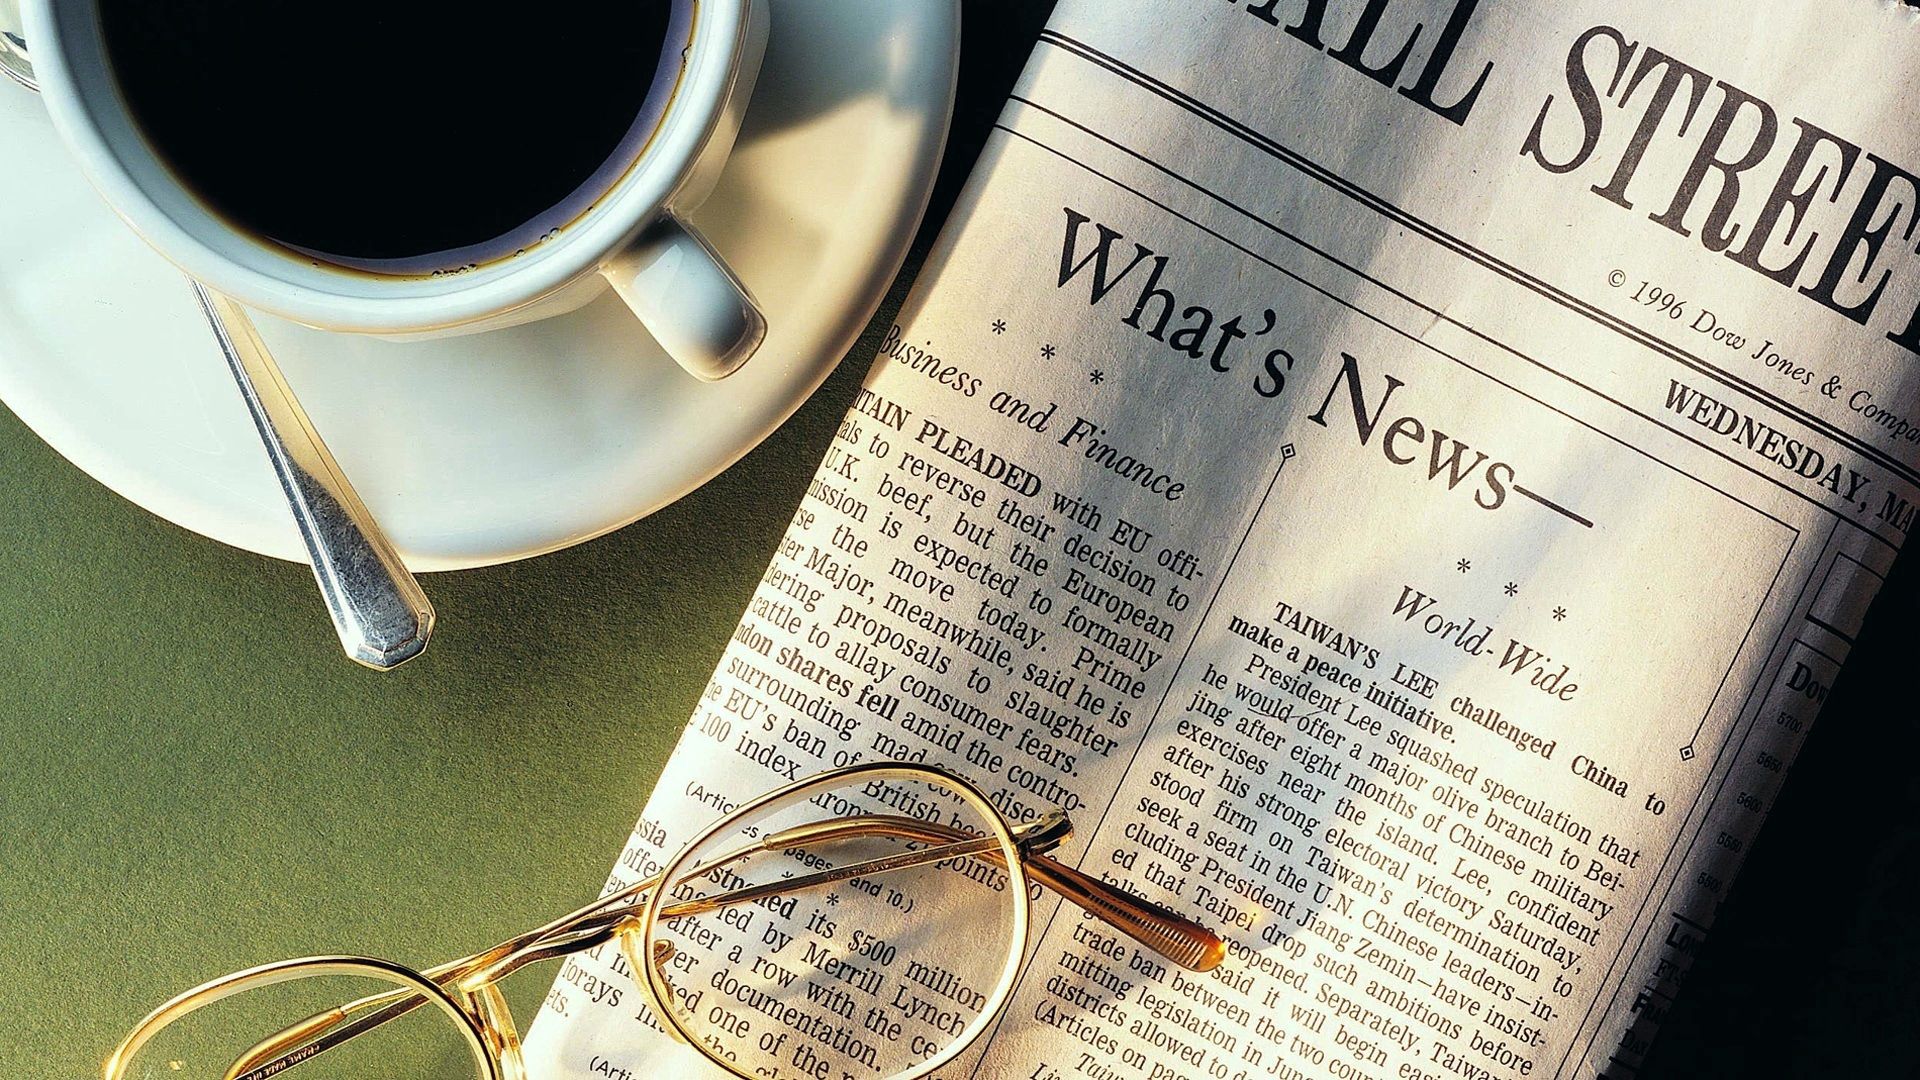 coffee, food, cup, glasses, spectacles, newspaper, spoon, news, cup holder Desktop home screen Wallpaper